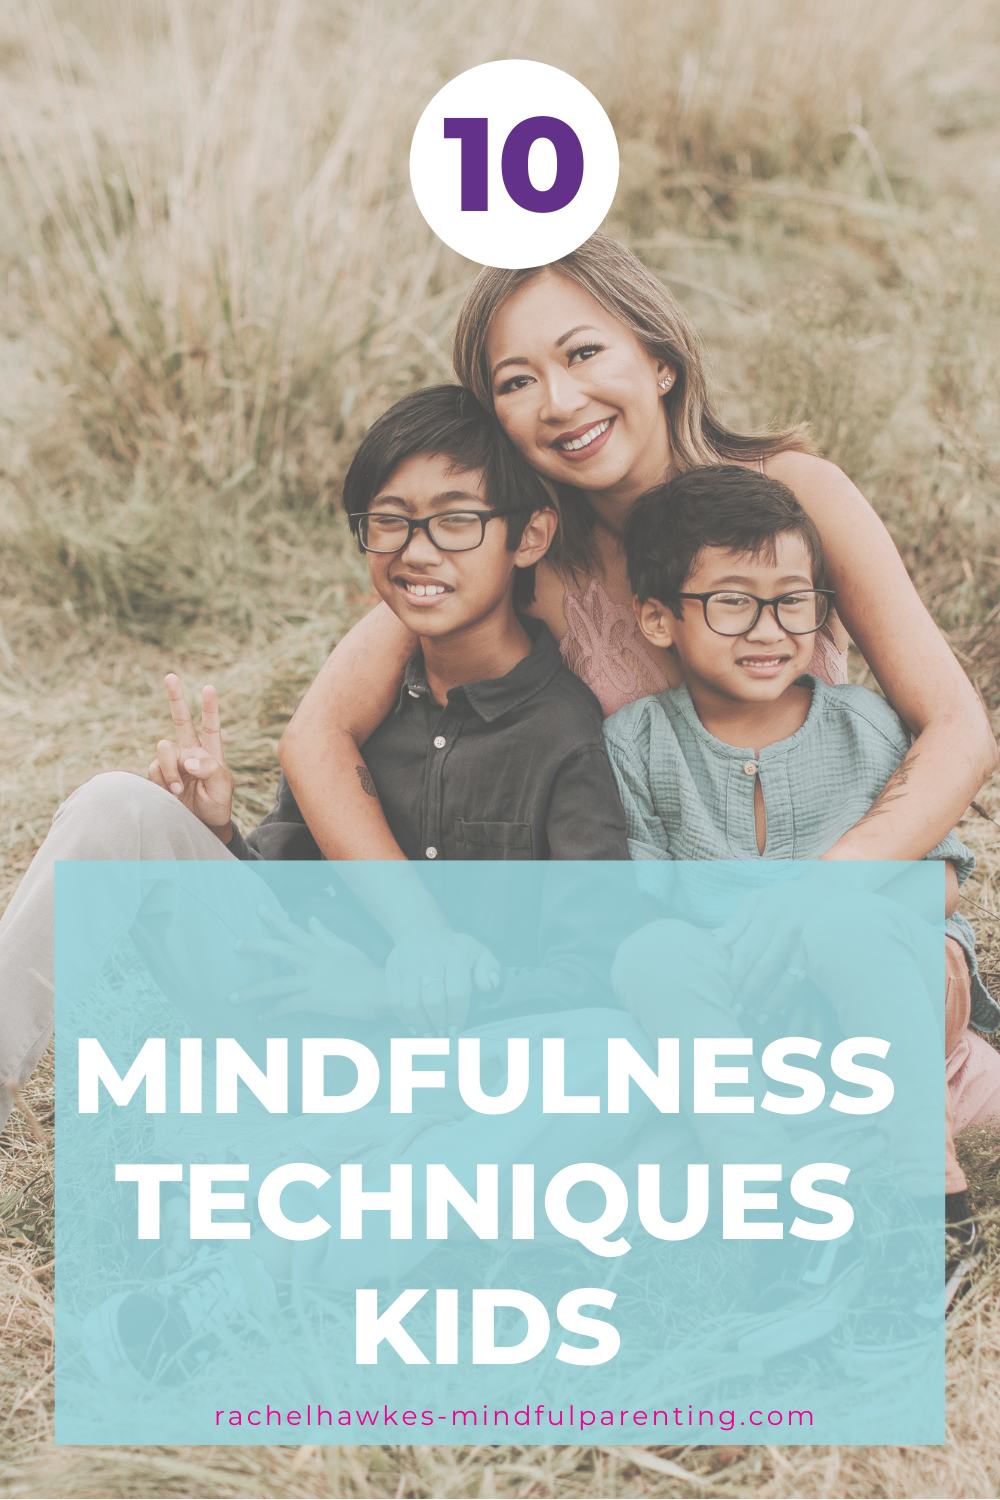 Mindfulness activities for kids 